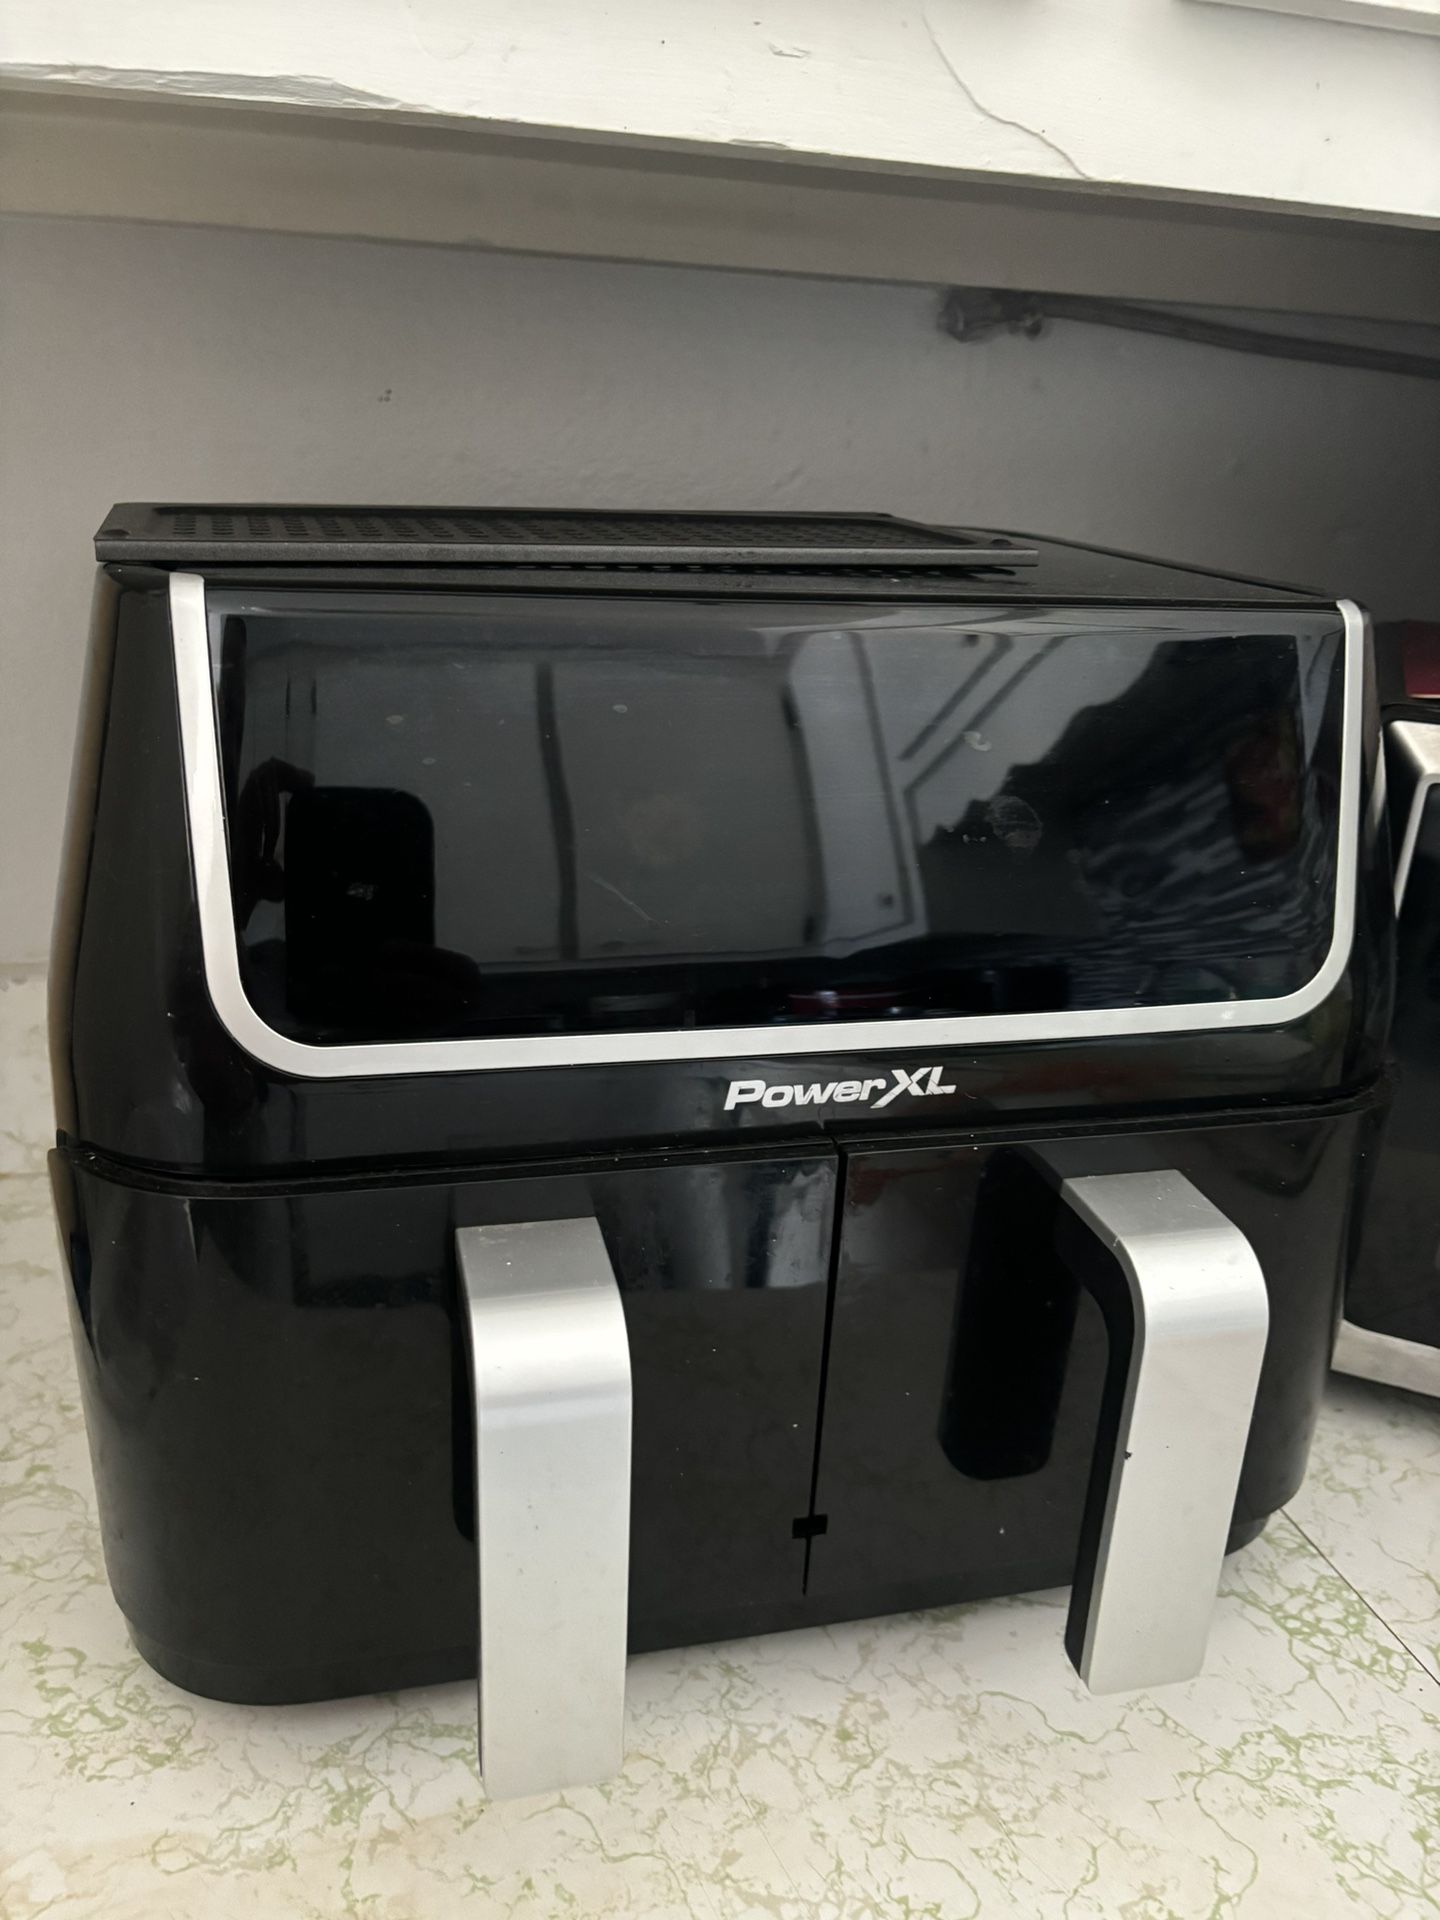 Double Sided Air Fryer 